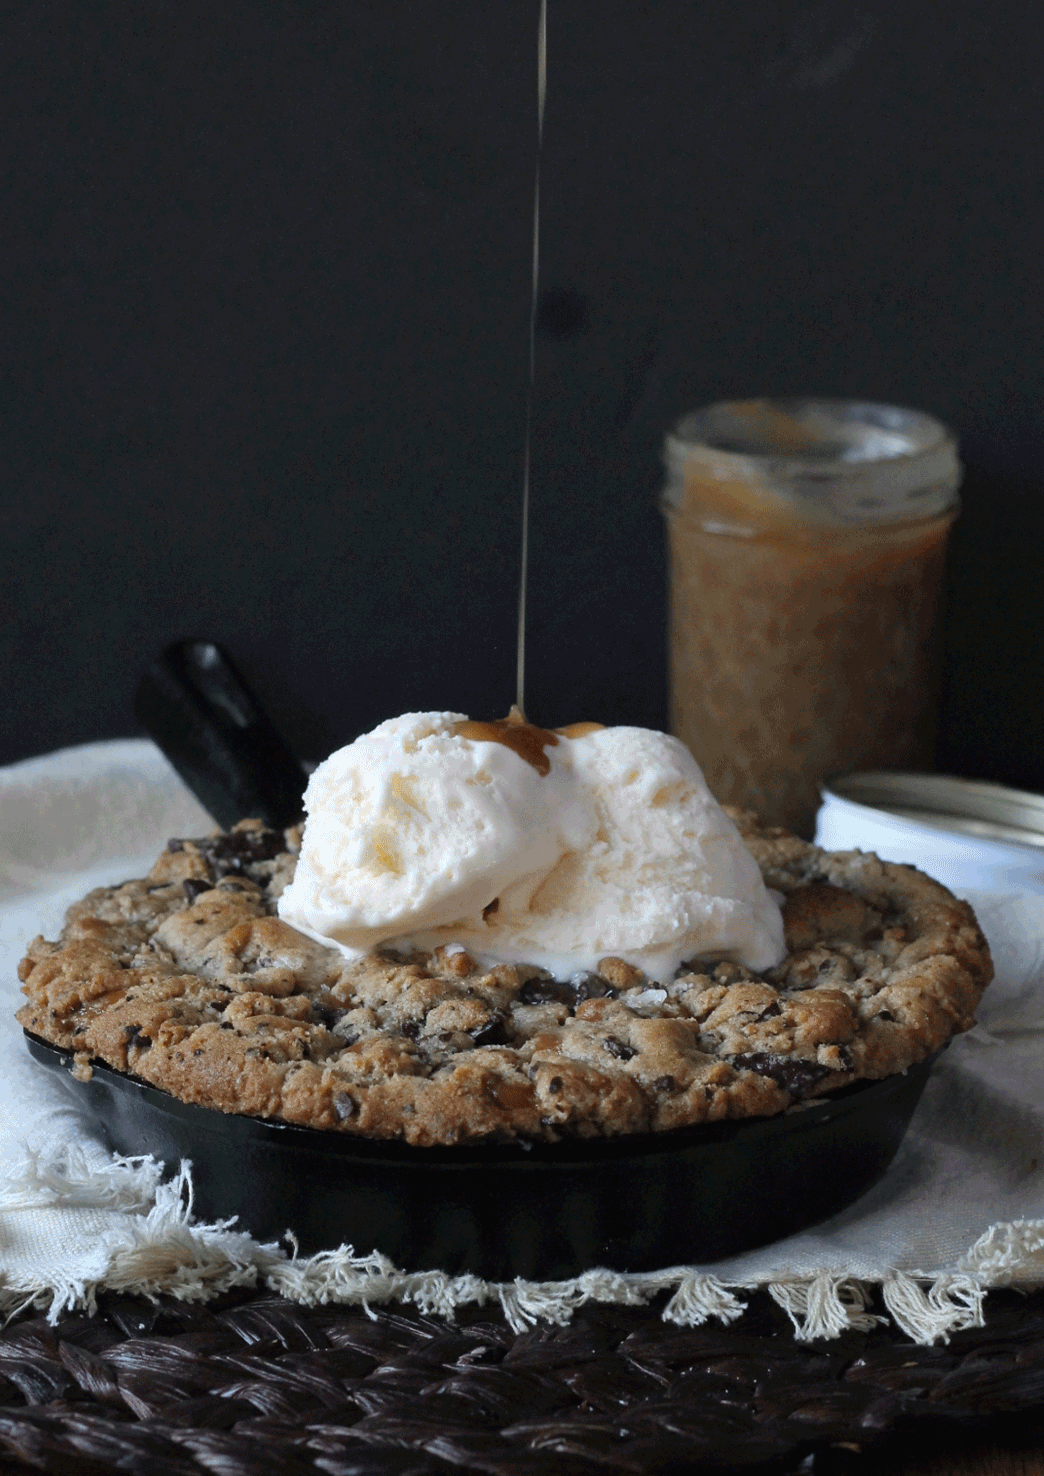 This Salted Caramel Filled Dark Chocolate Chunk Skillet Cookie is gooey, crunchy, and flowing with salted caramel! This is one treat best served with ice cream and friends.